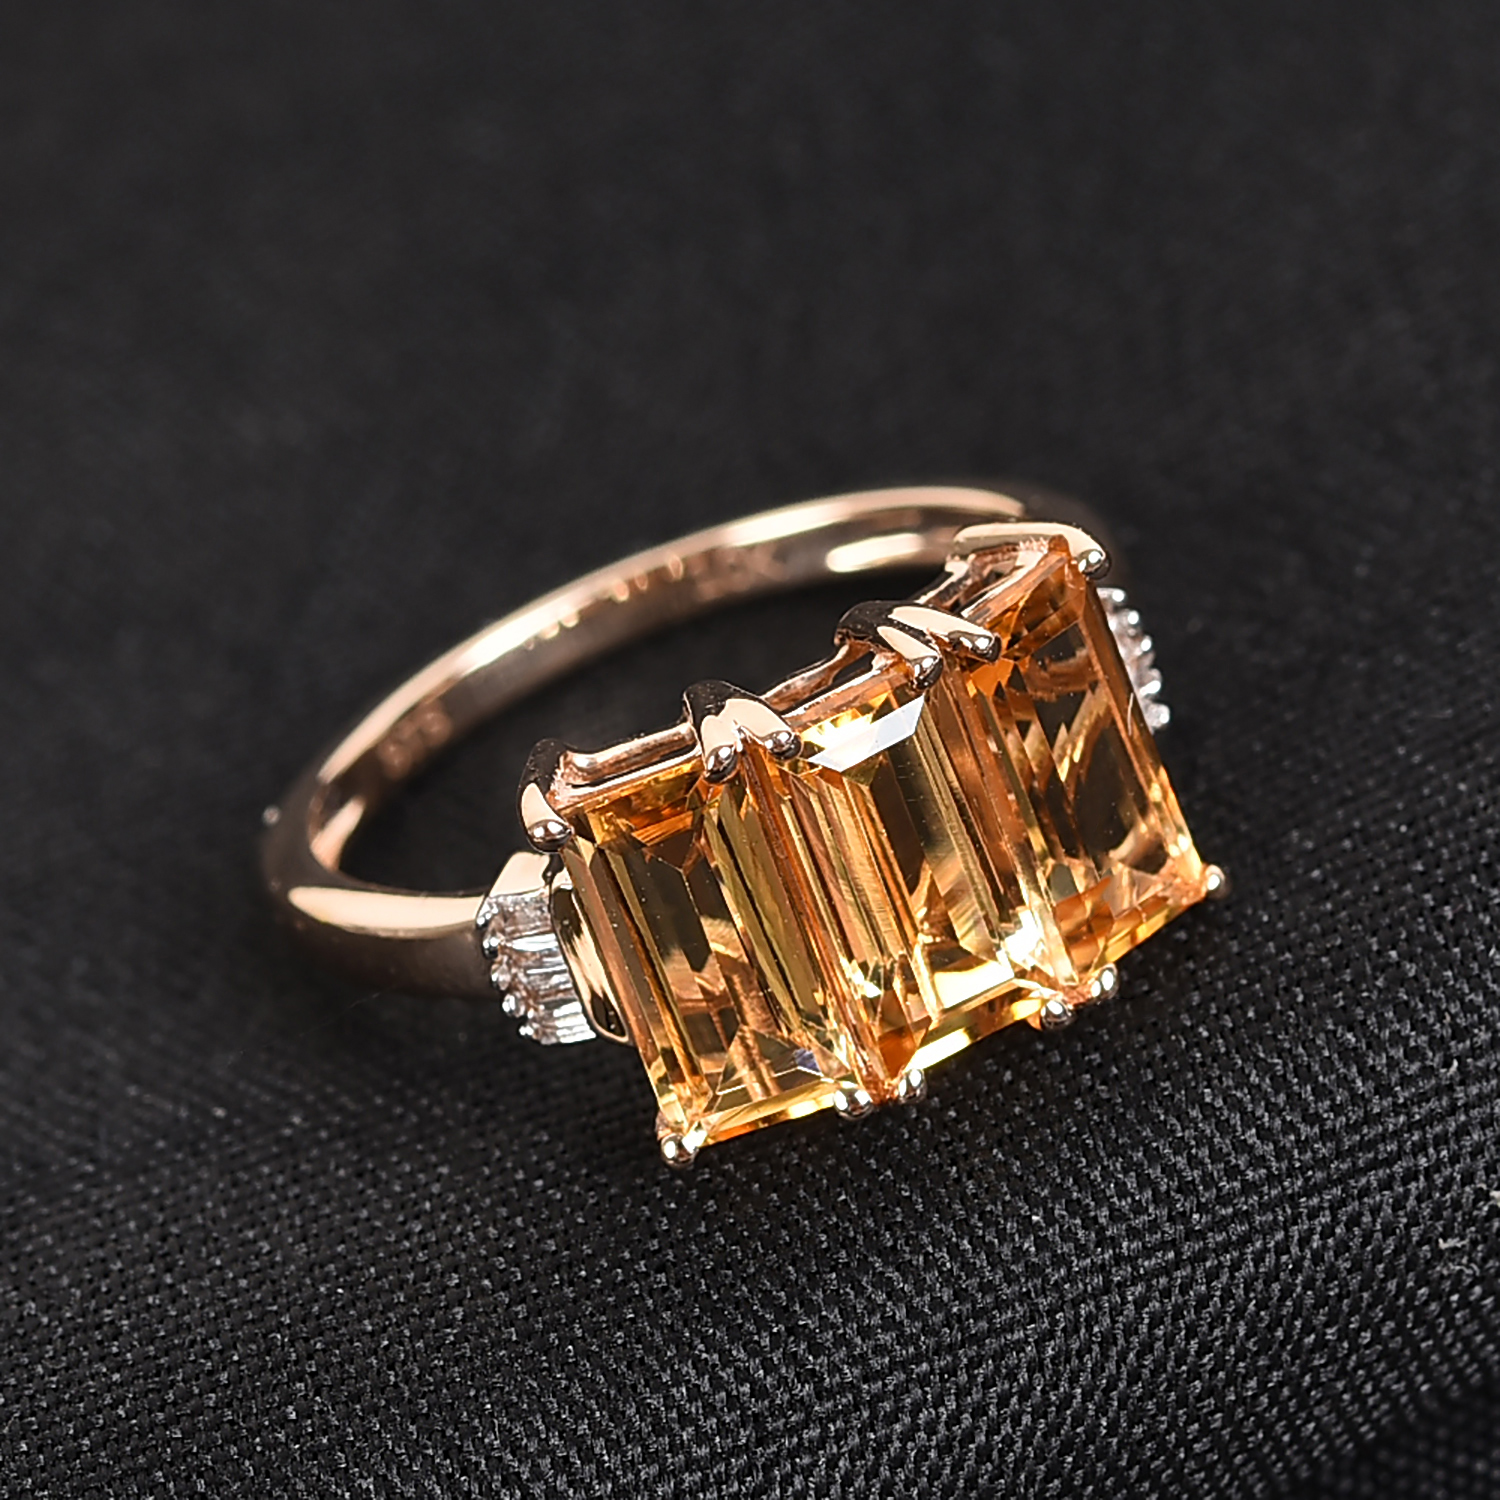 Topaz Crystal With Gold Ring